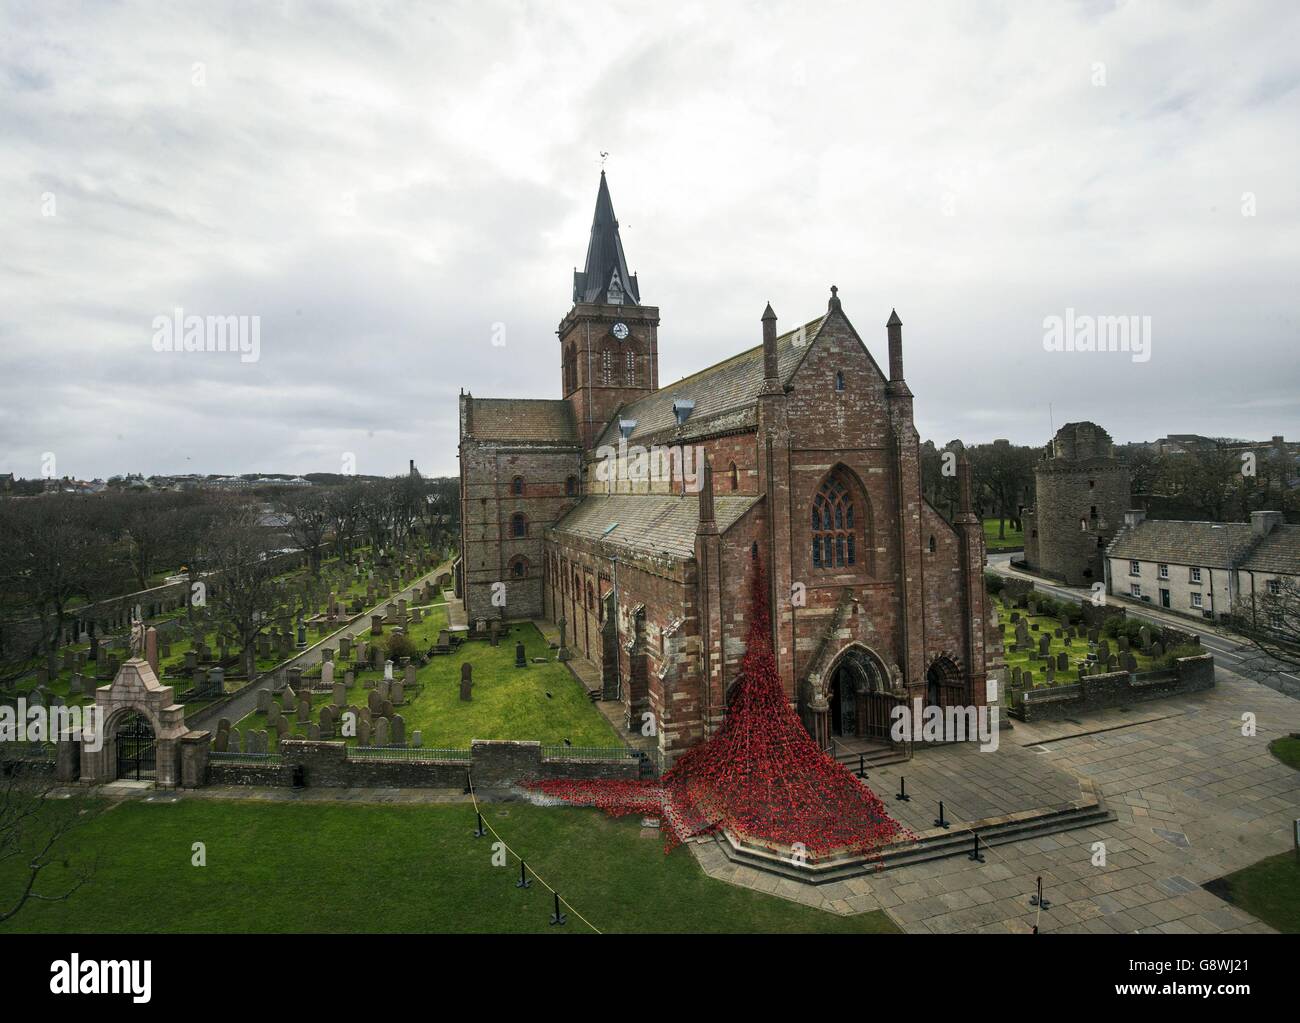 The Weeping Window sculpture made of ceramic poppies at St Magnus Cathedral in Orkney, Scotland, part of a UK-wide tour organised by 14-18 NOW. Stock Photo